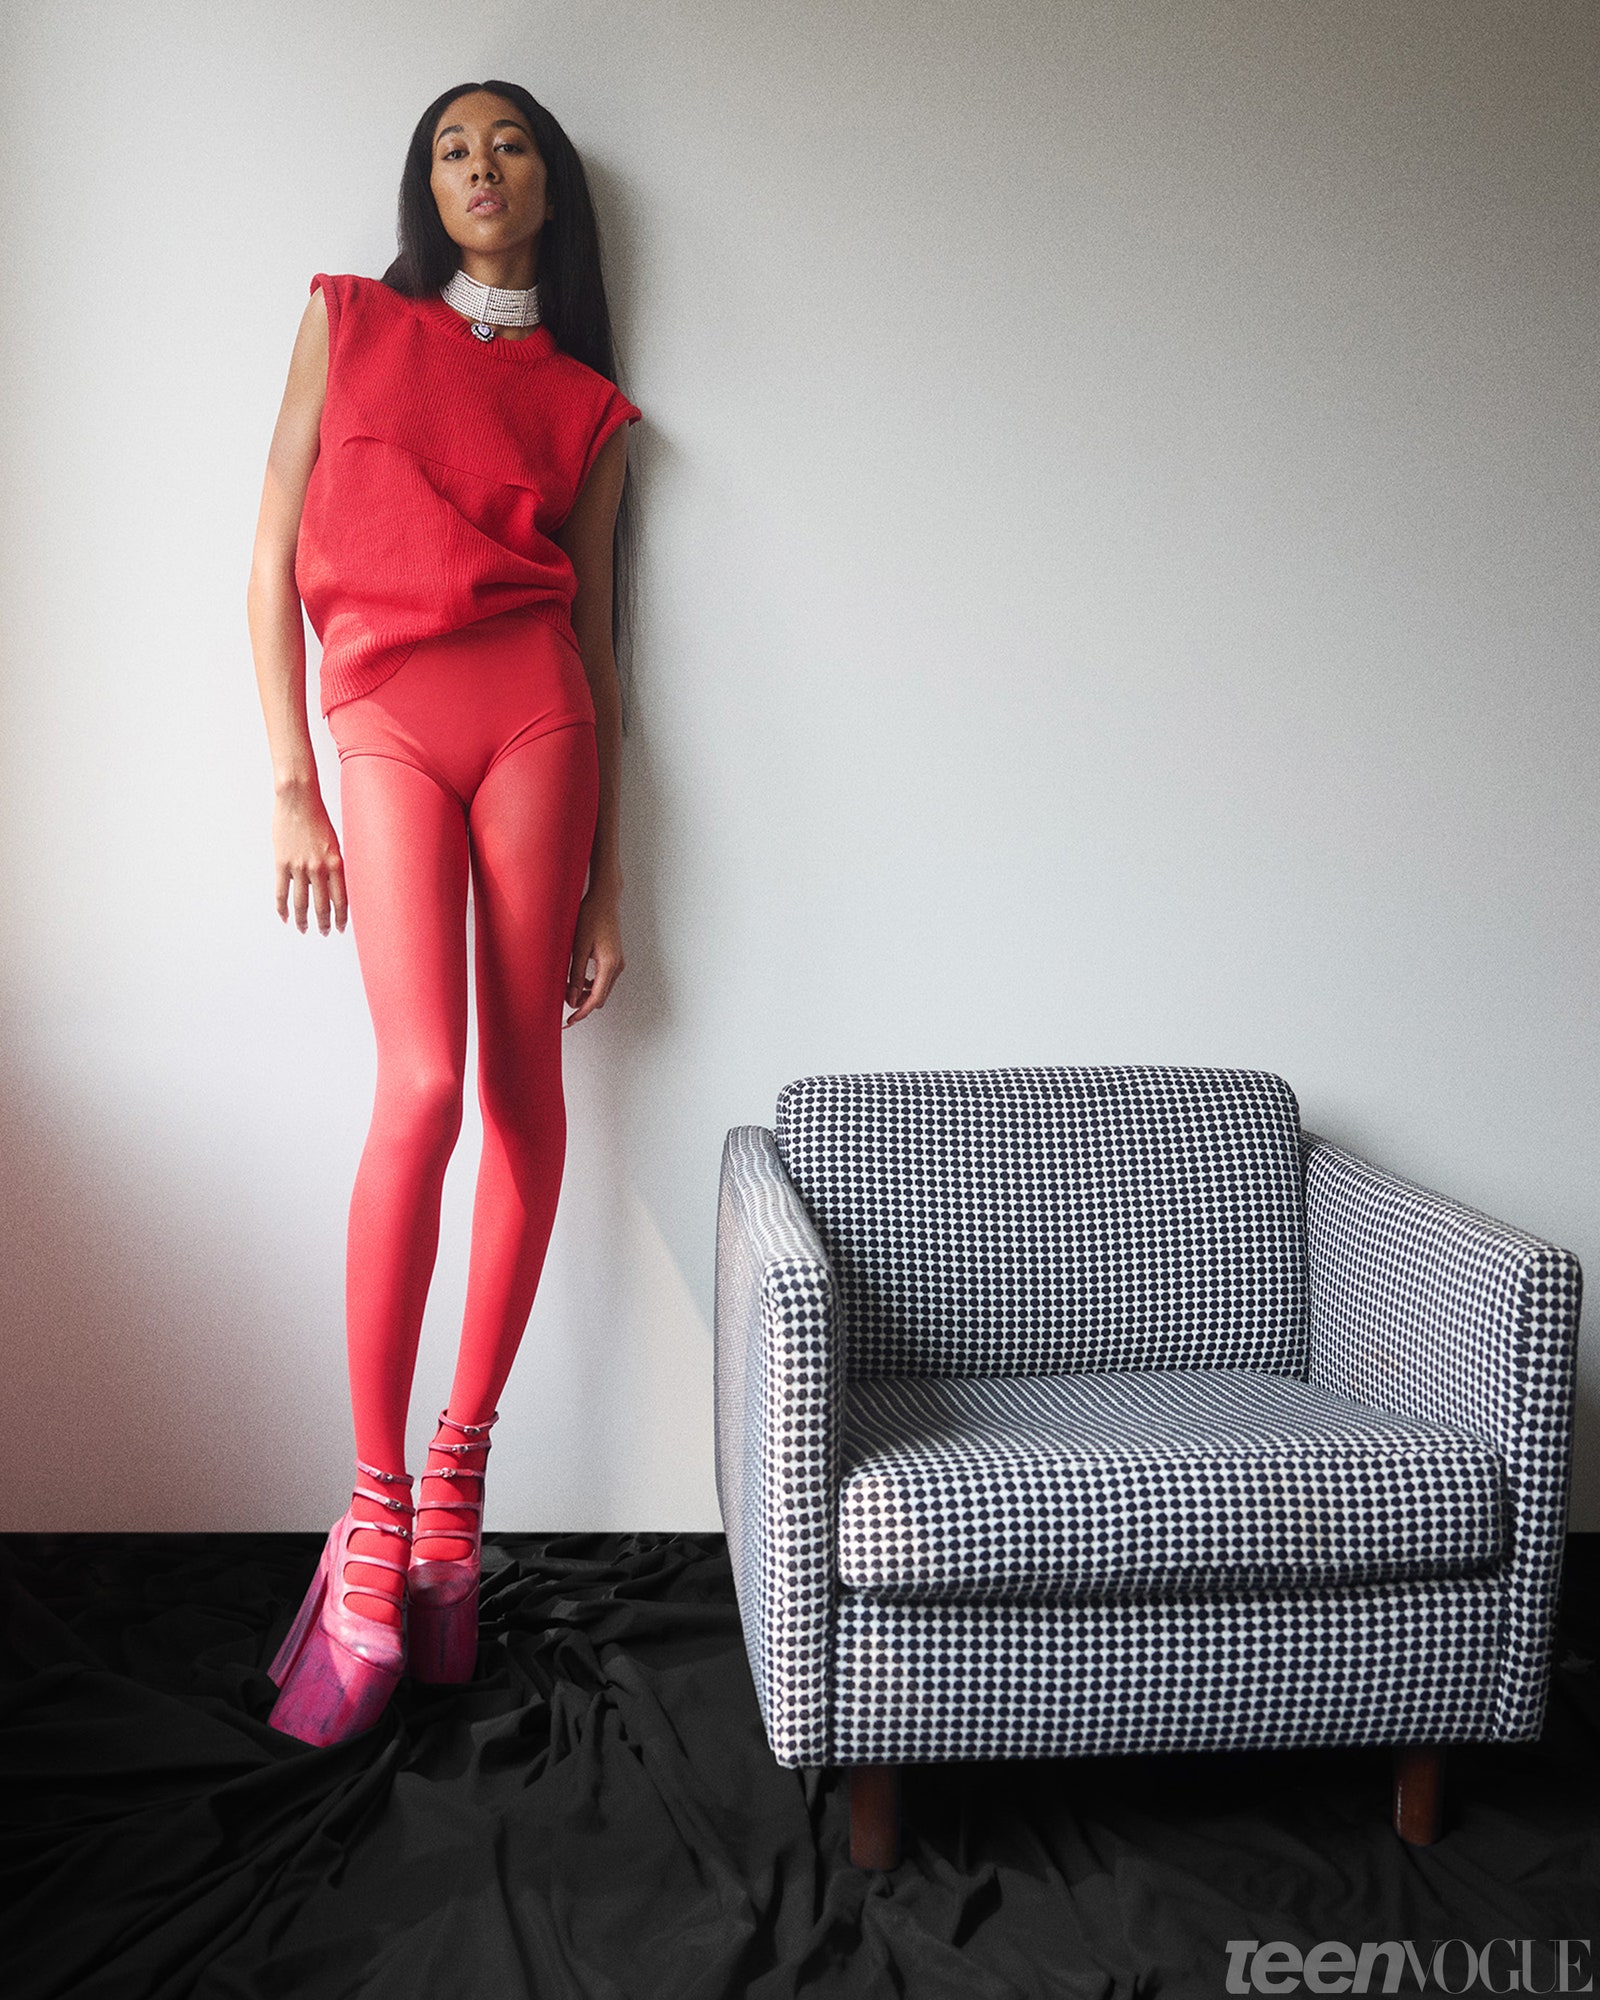 Aoki Lee Simmons wearing all red standing next to a loveseat.